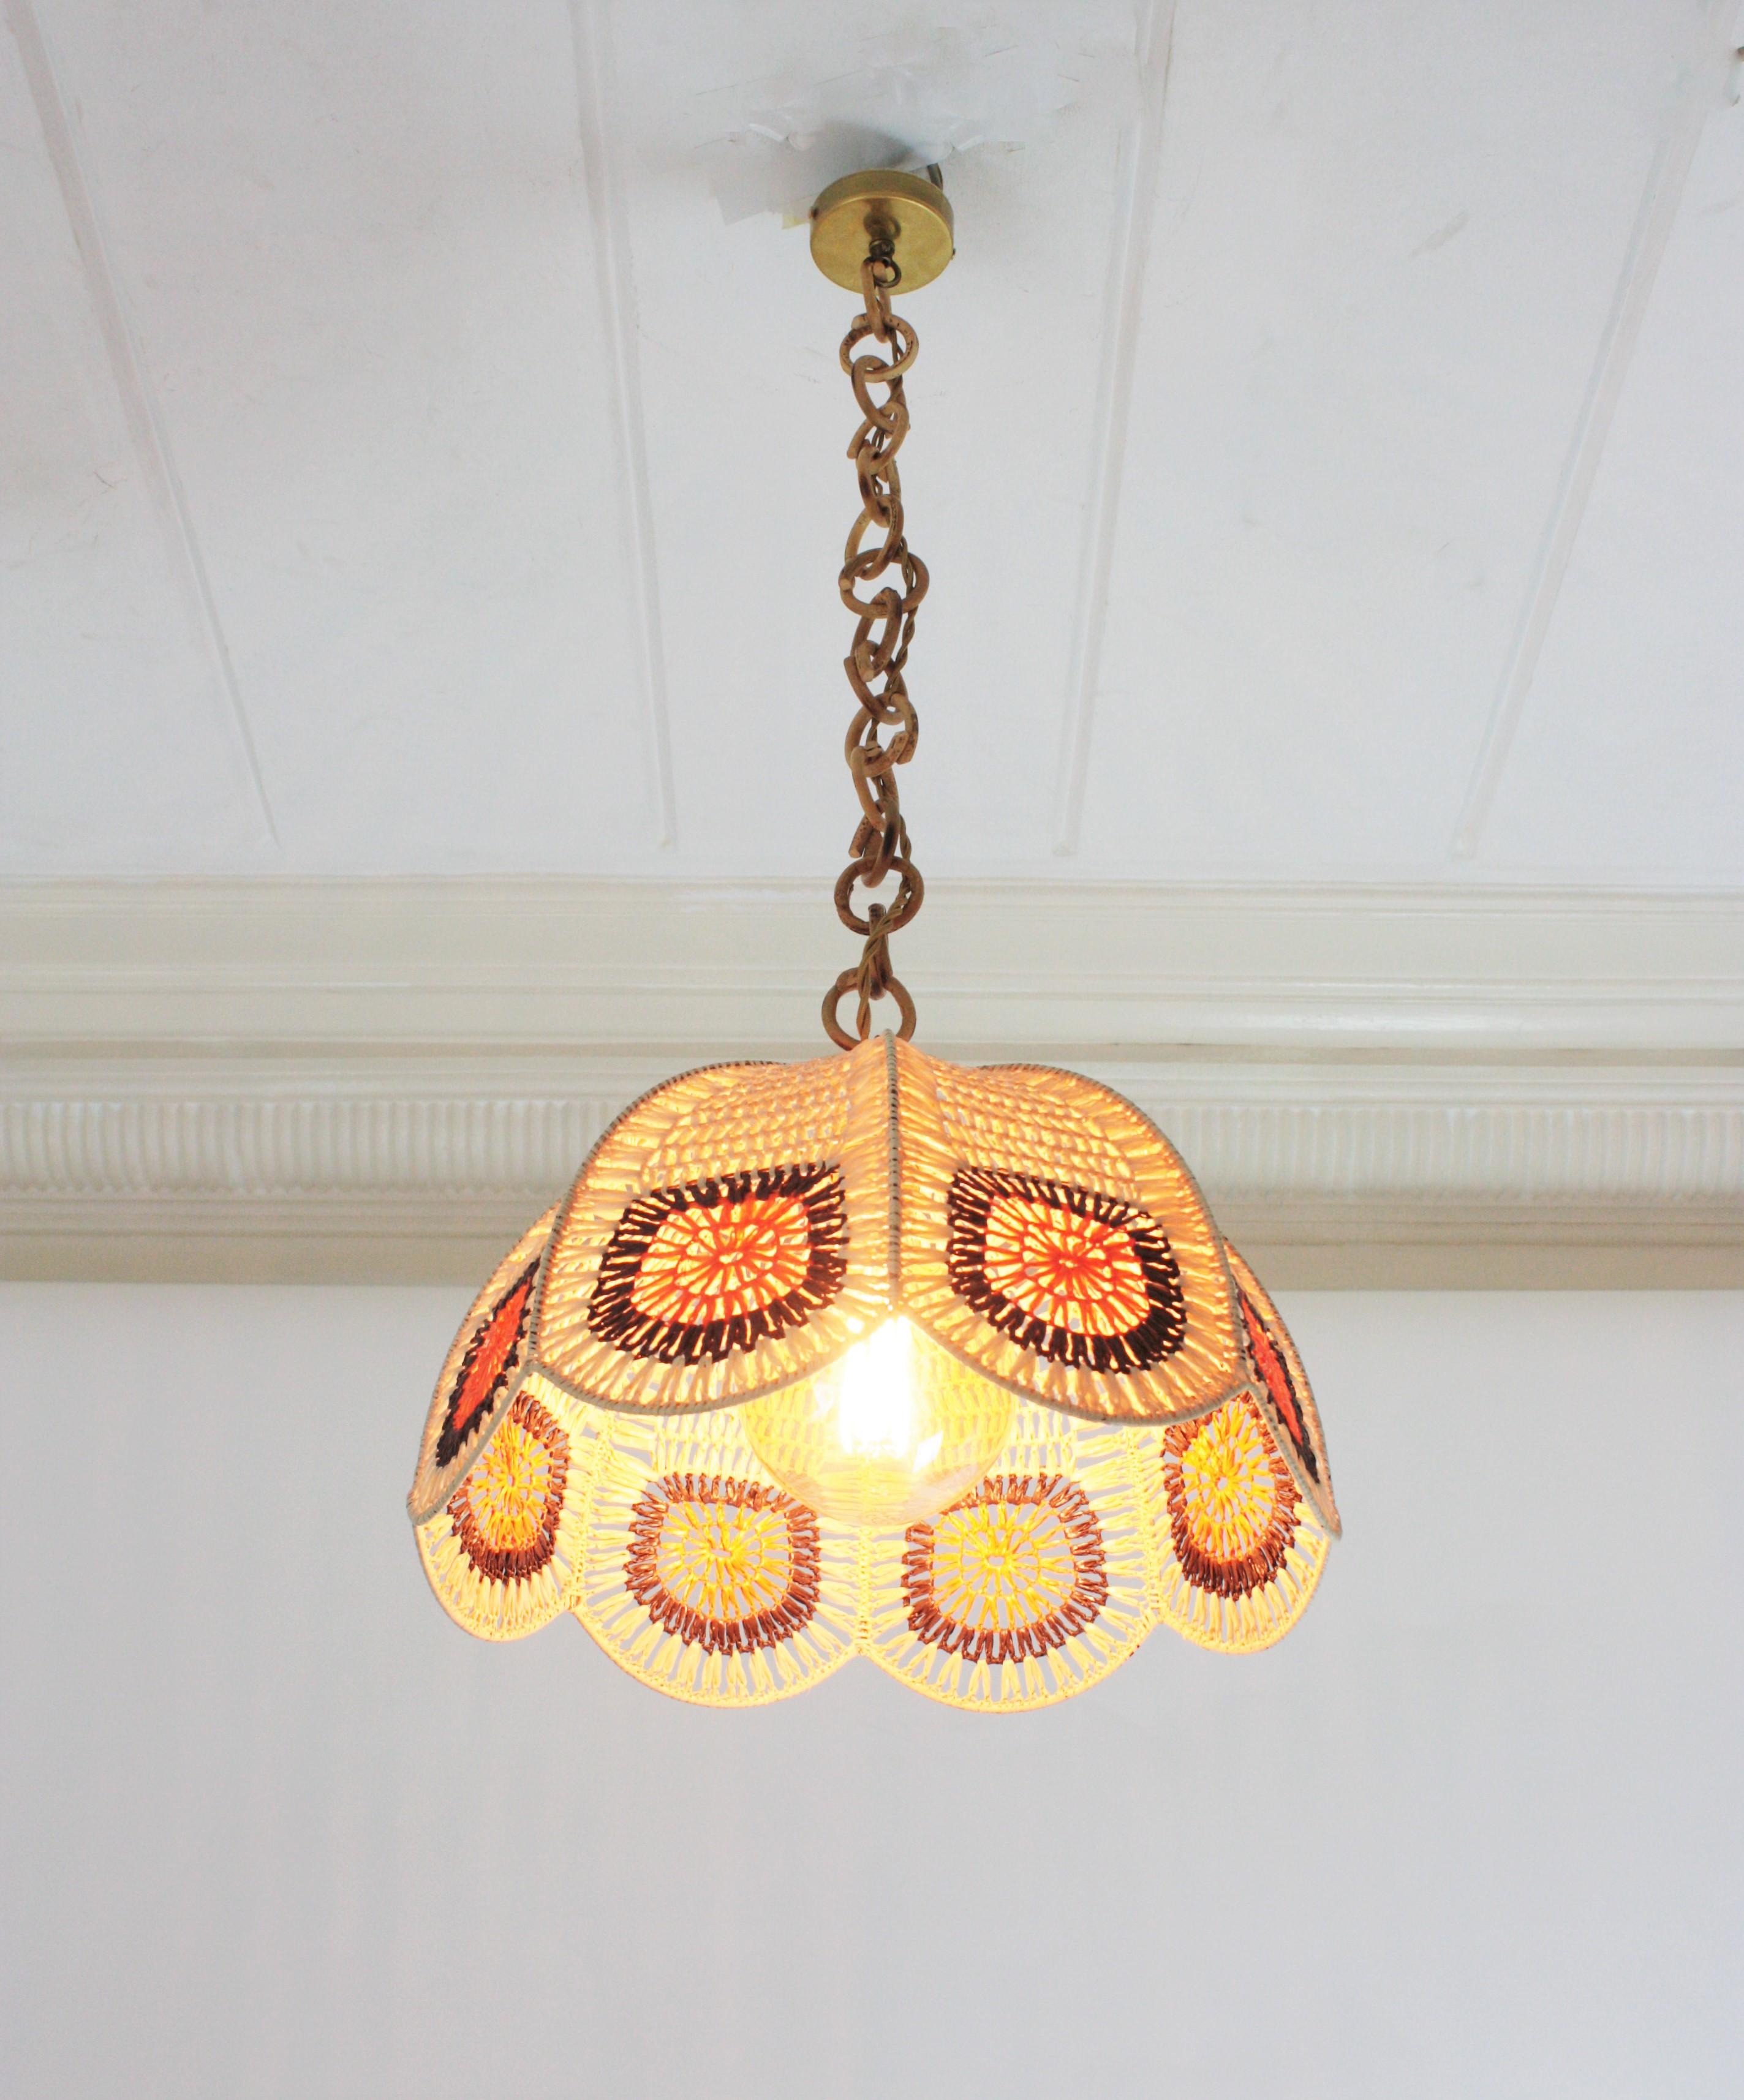 Spanish Modernist Pendant Lamp in Beige, Orange and Brown Macrame For Sale 12